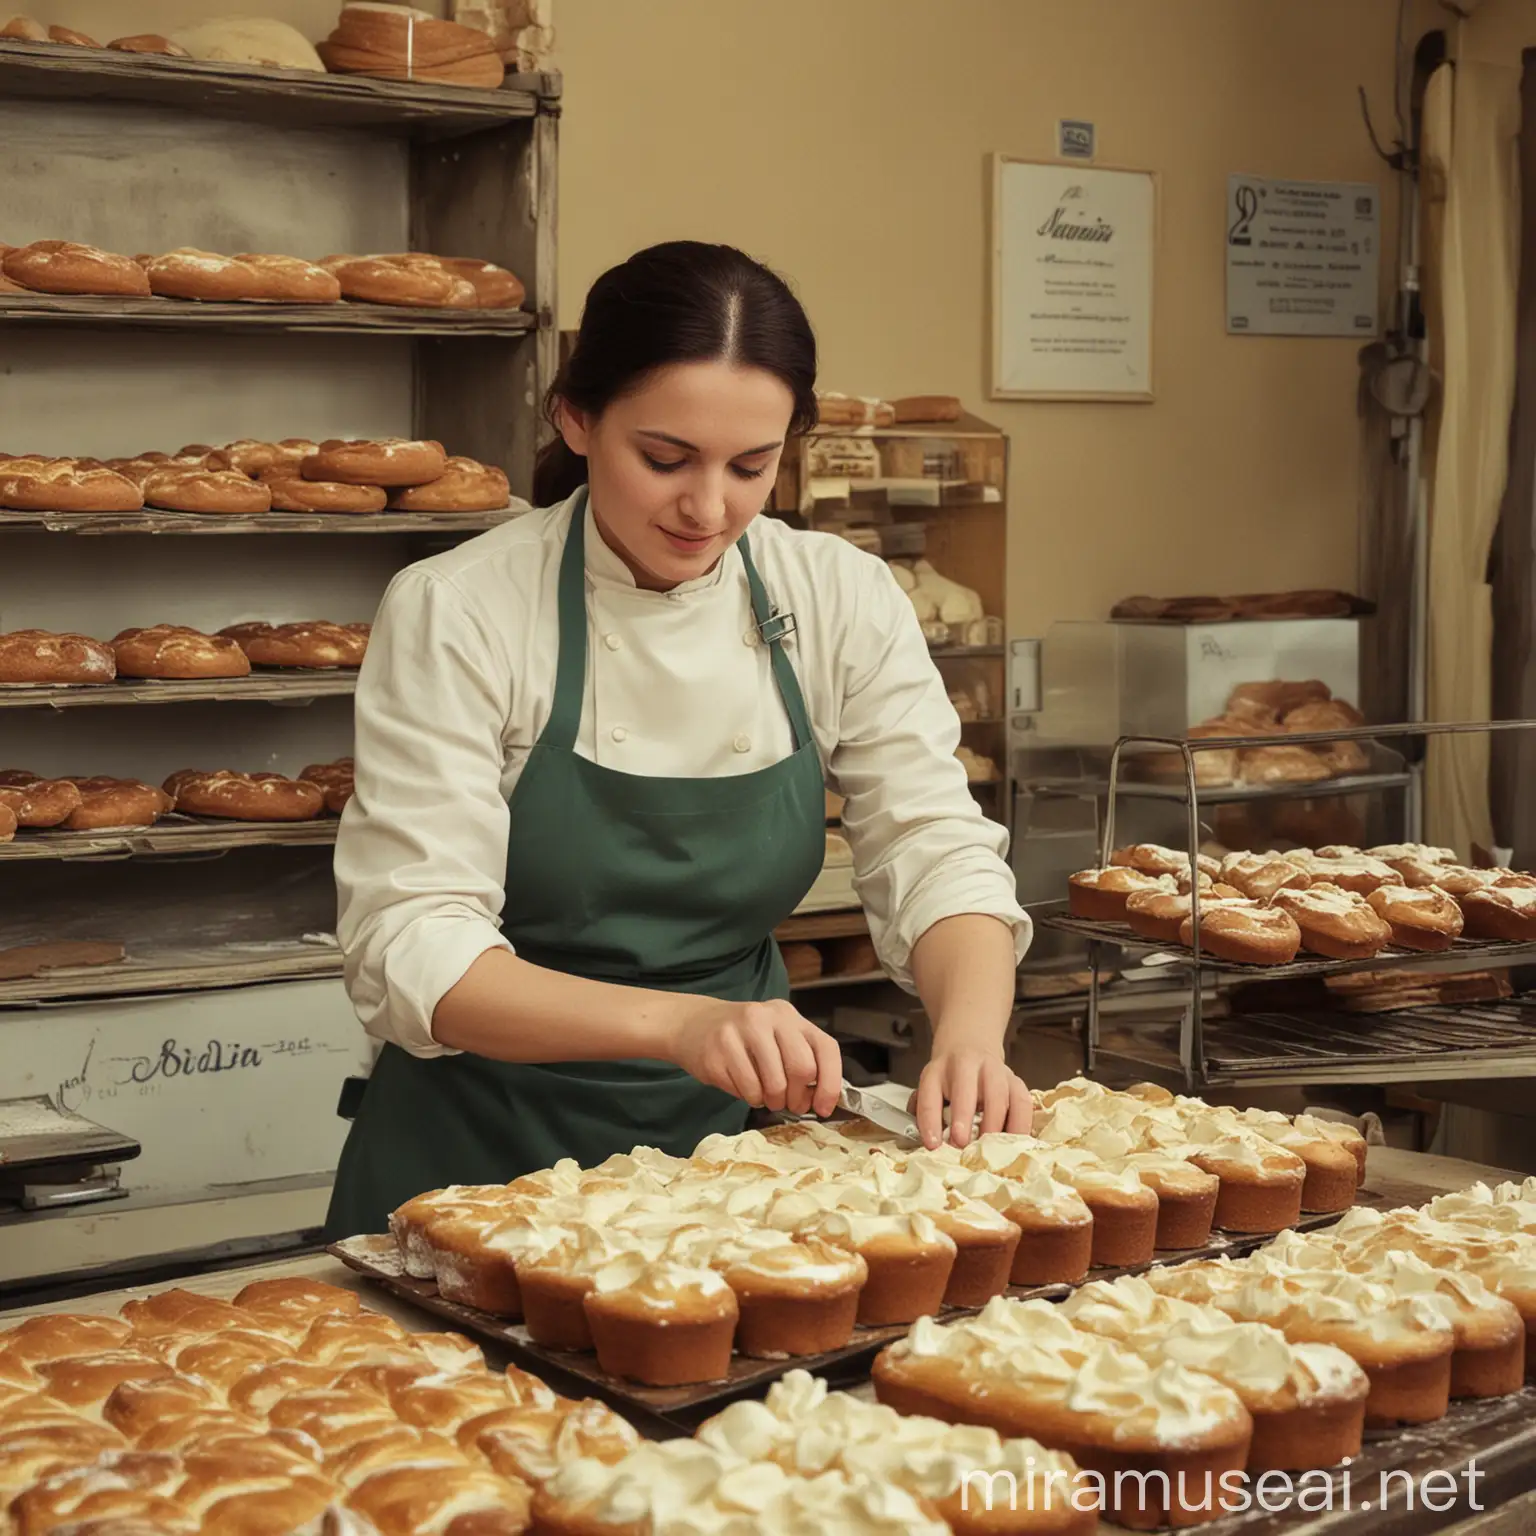 In a bakery called Nardin, a woman is baking a cake